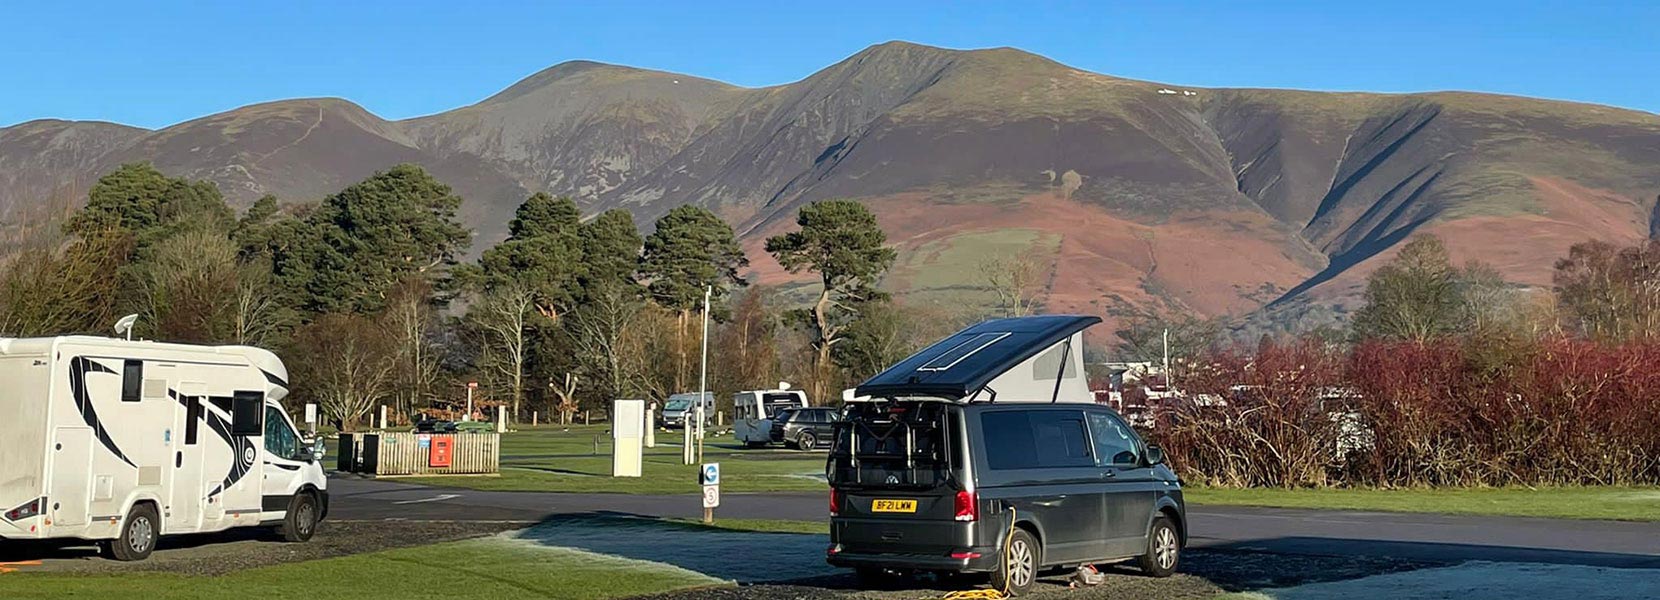 Motorhomes pitched at a campsites overlooking a picturesque view of the Scottish Highlands or Lake District